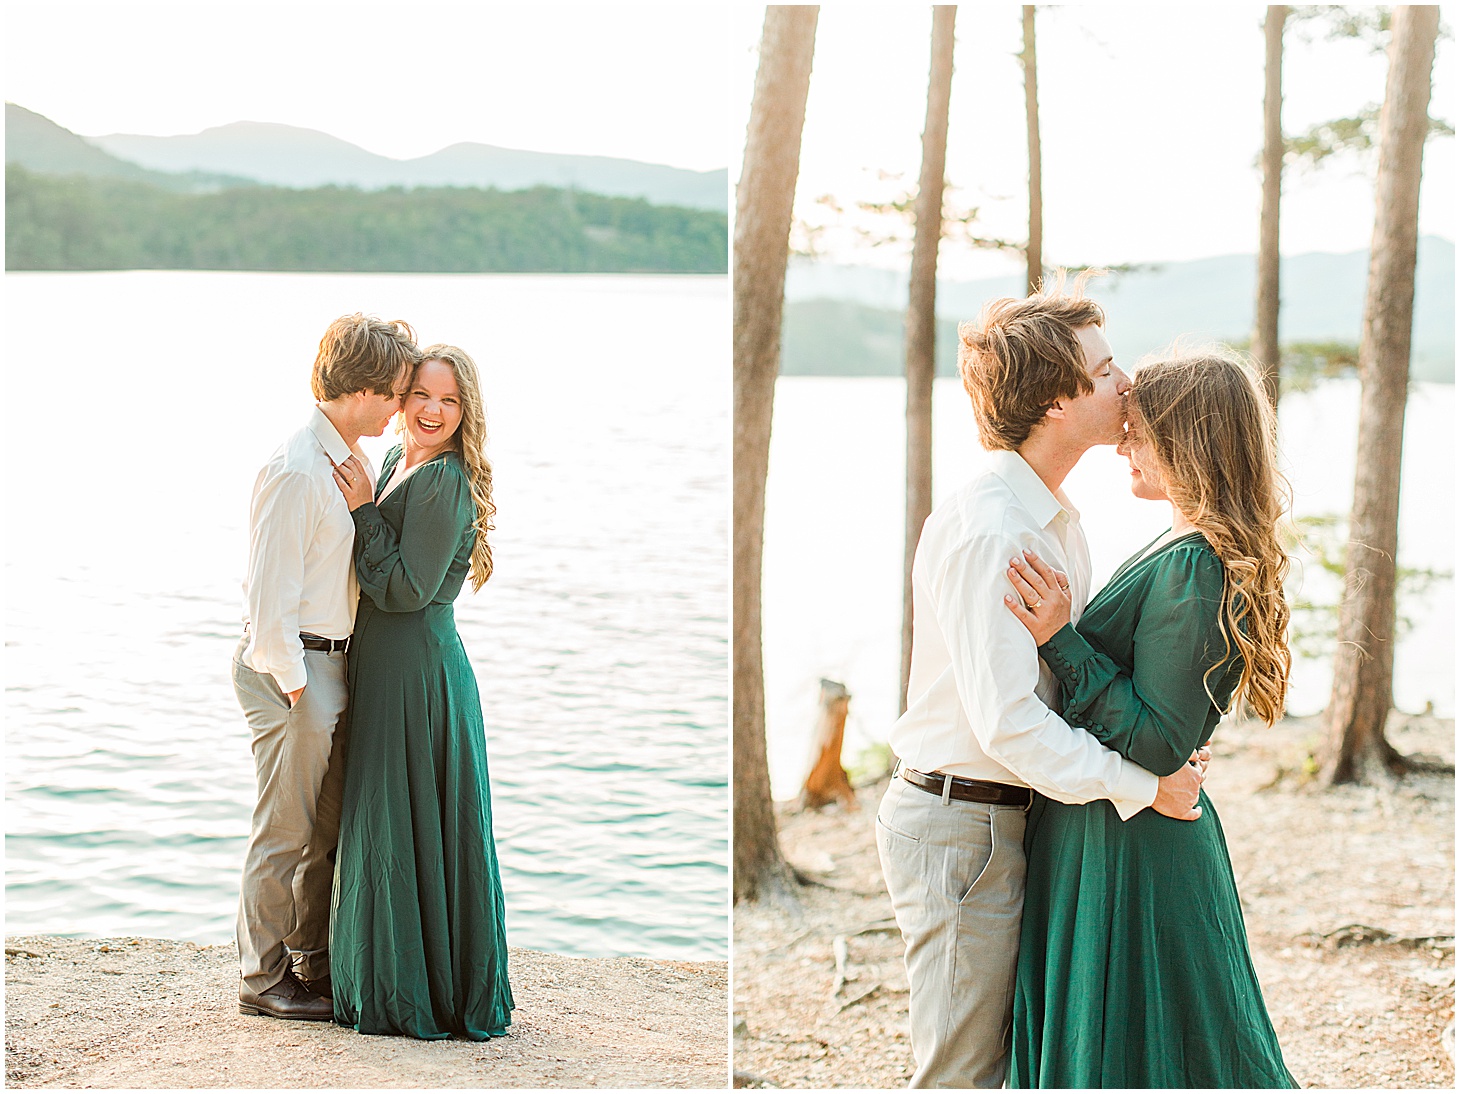 carvinscoveengagementsession_roanokeengagementsession_carvinscove_virginiawedding_virginiaweddingphotographer_vaweddingphotographer_photo_0050.jpg